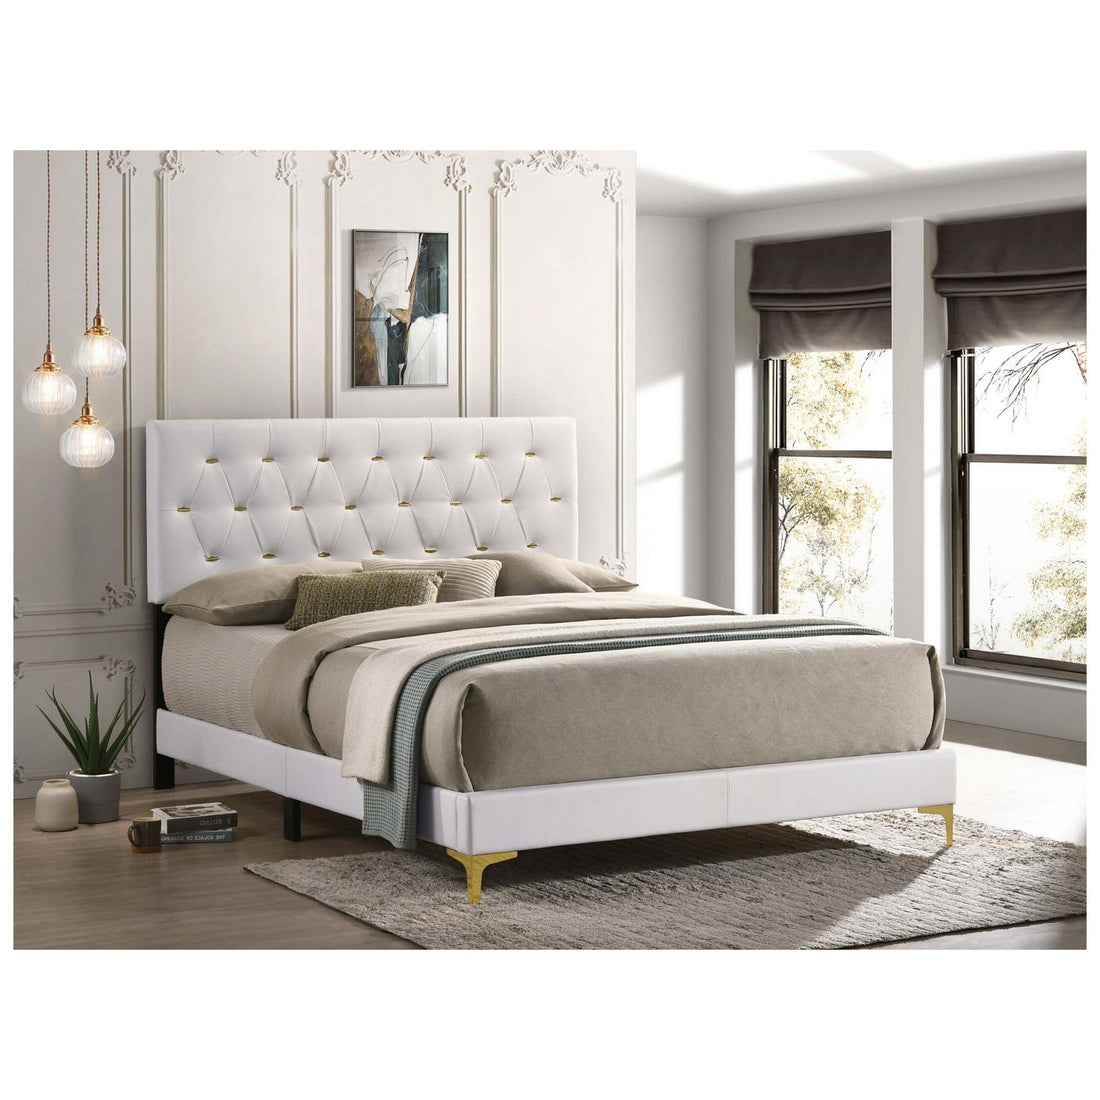 Kendall Tufted Upholstered Panel California King Bed White 224401KW